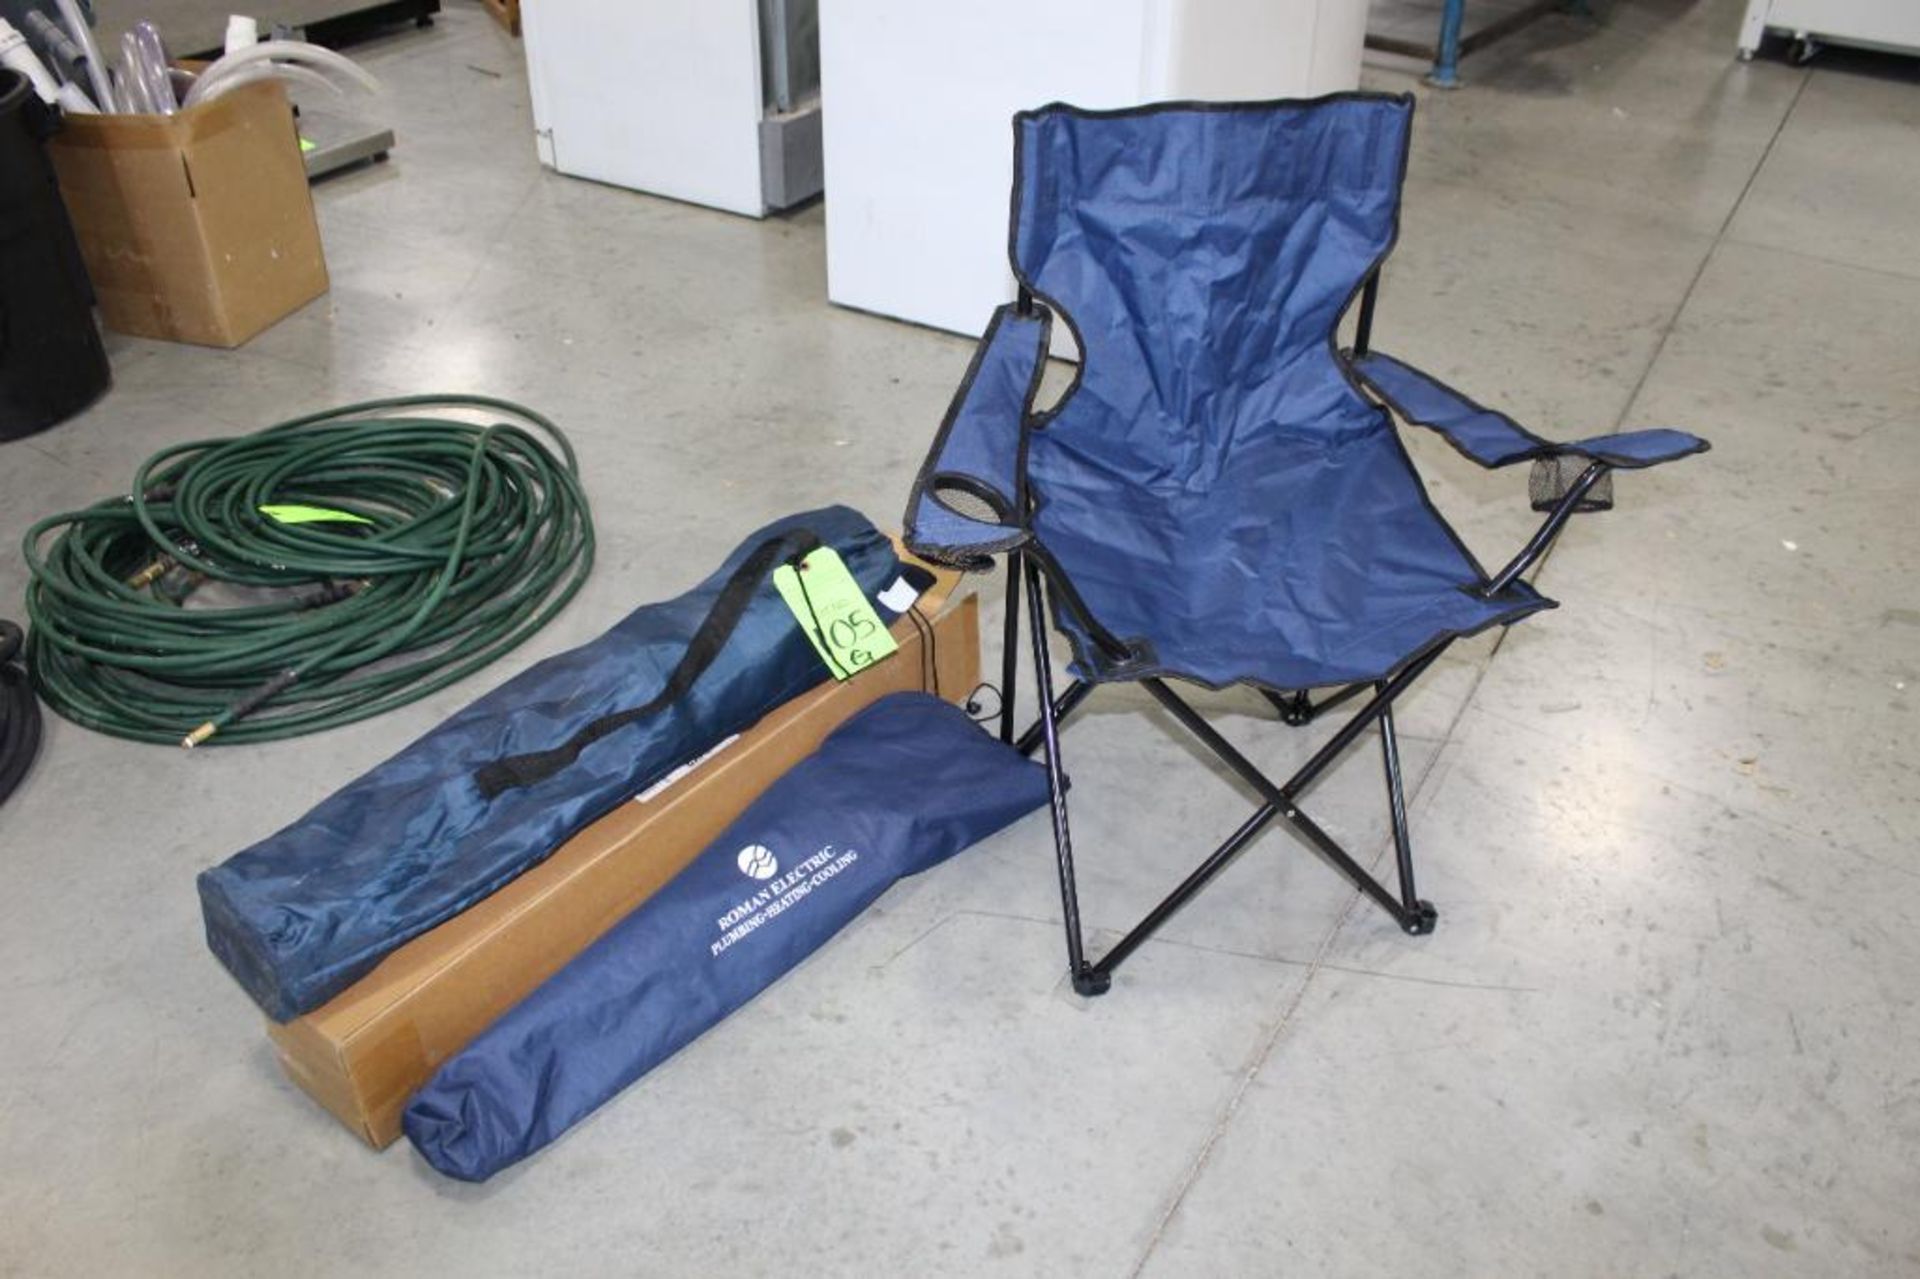 Lot of 2 foldable camping chairs